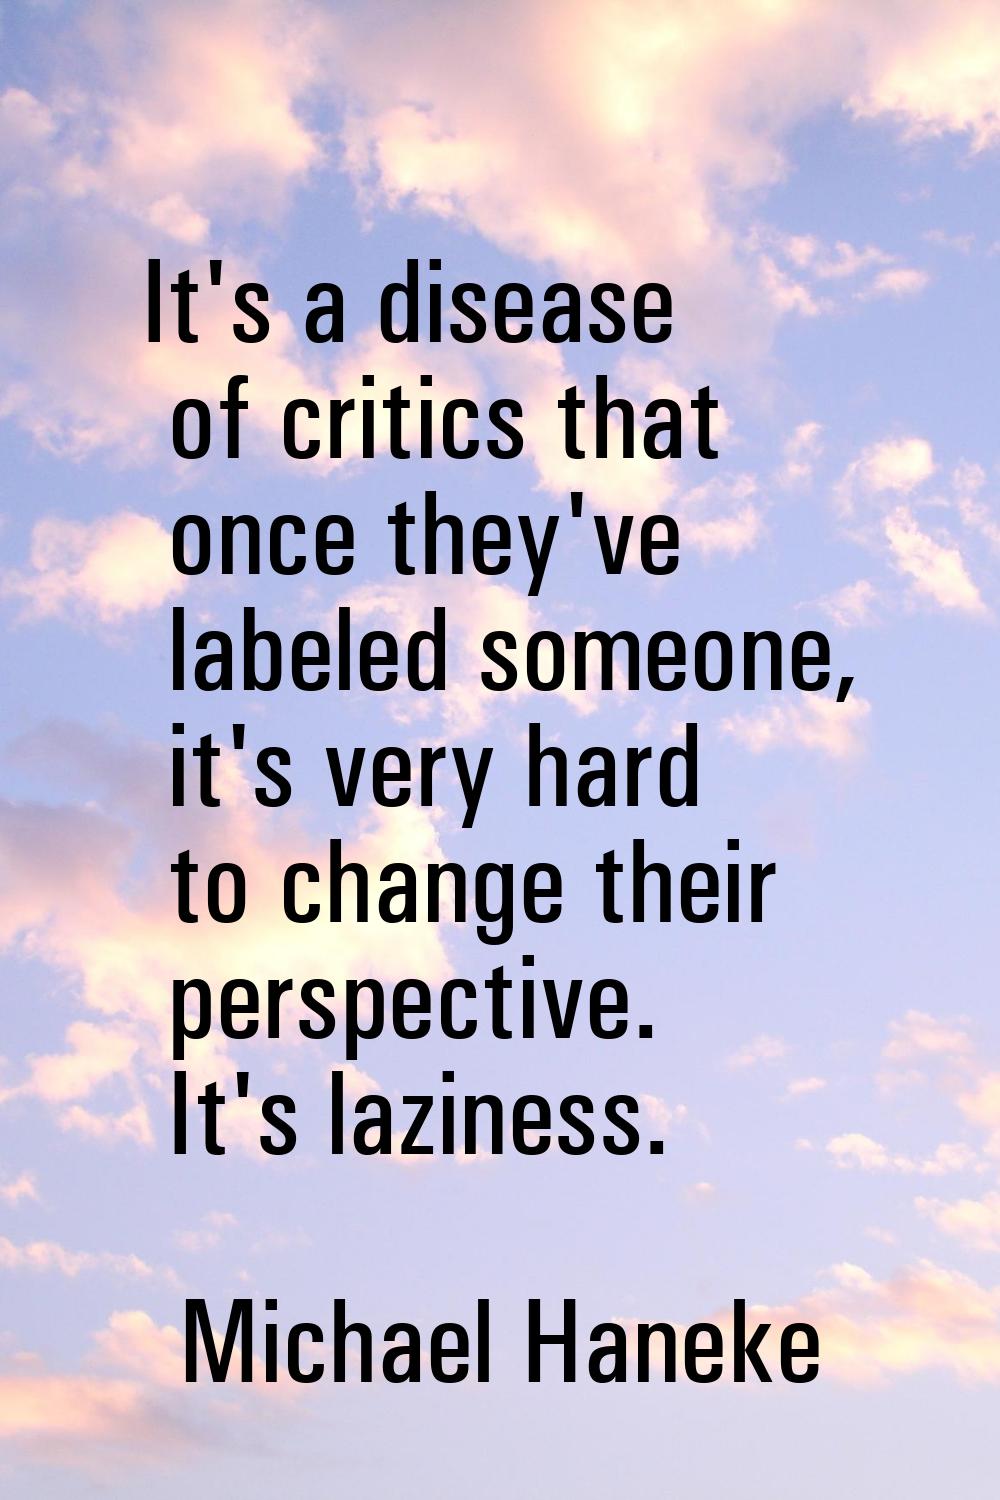 It's a disease of critics that once they've labeled someone, it's very hard to change their perspec